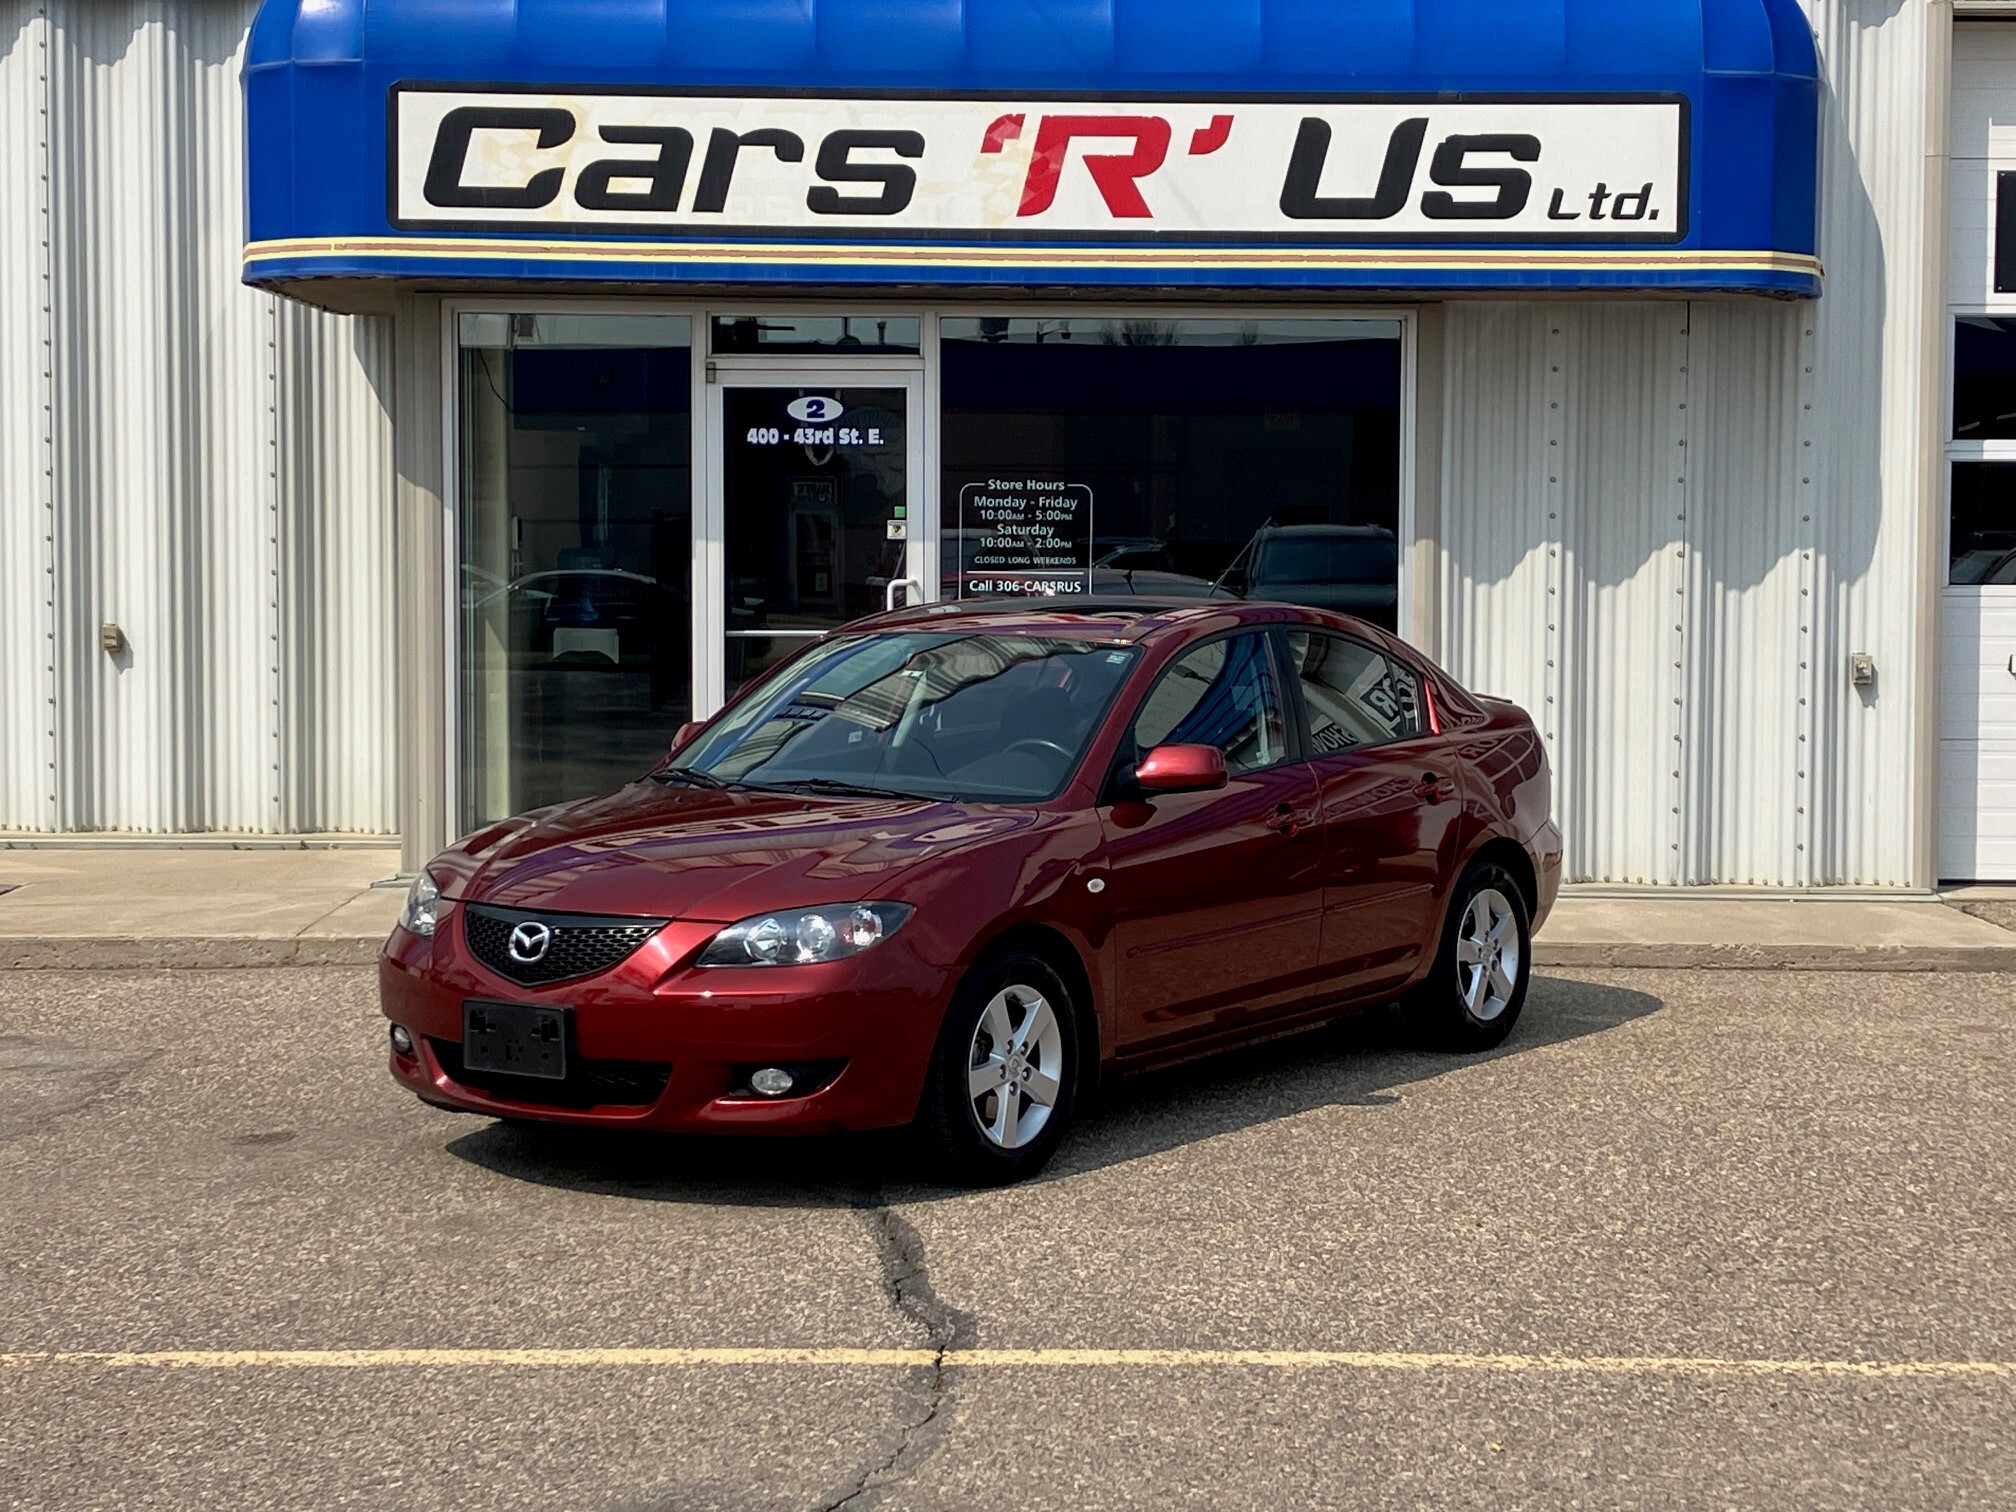 2006 Mazda Mazda3 4dr Sdn GX Auto SUNROOF ATC PW PDL ONLY 82K!